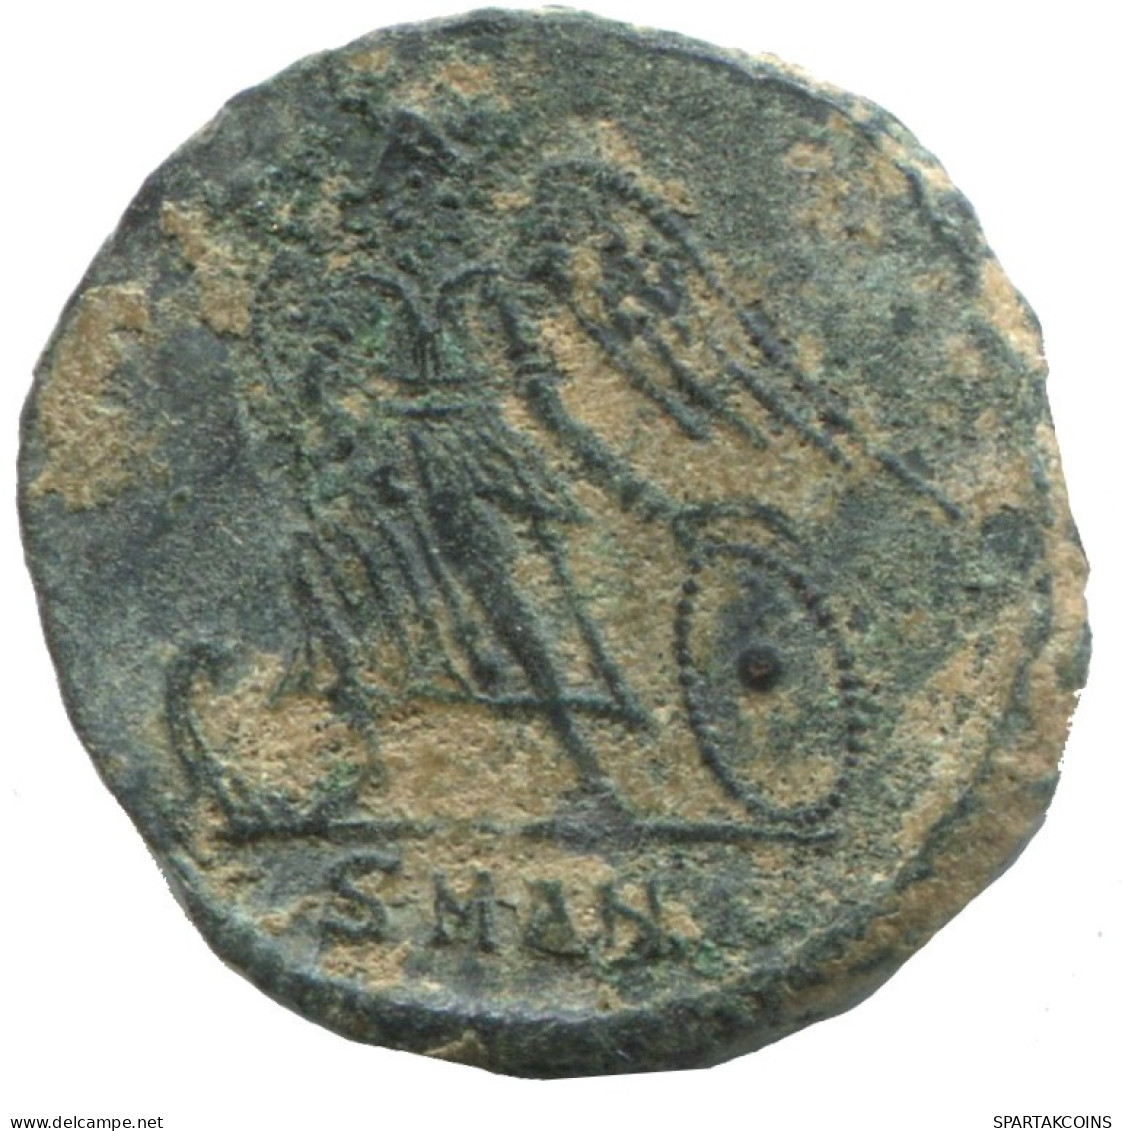 CONSTANTINOPOLIS ANTIOCH SMANI VICTORY 1.6g/16mm #ANN1203.9.F.A - The Christian Empire (307 AD Tot 363 AD)